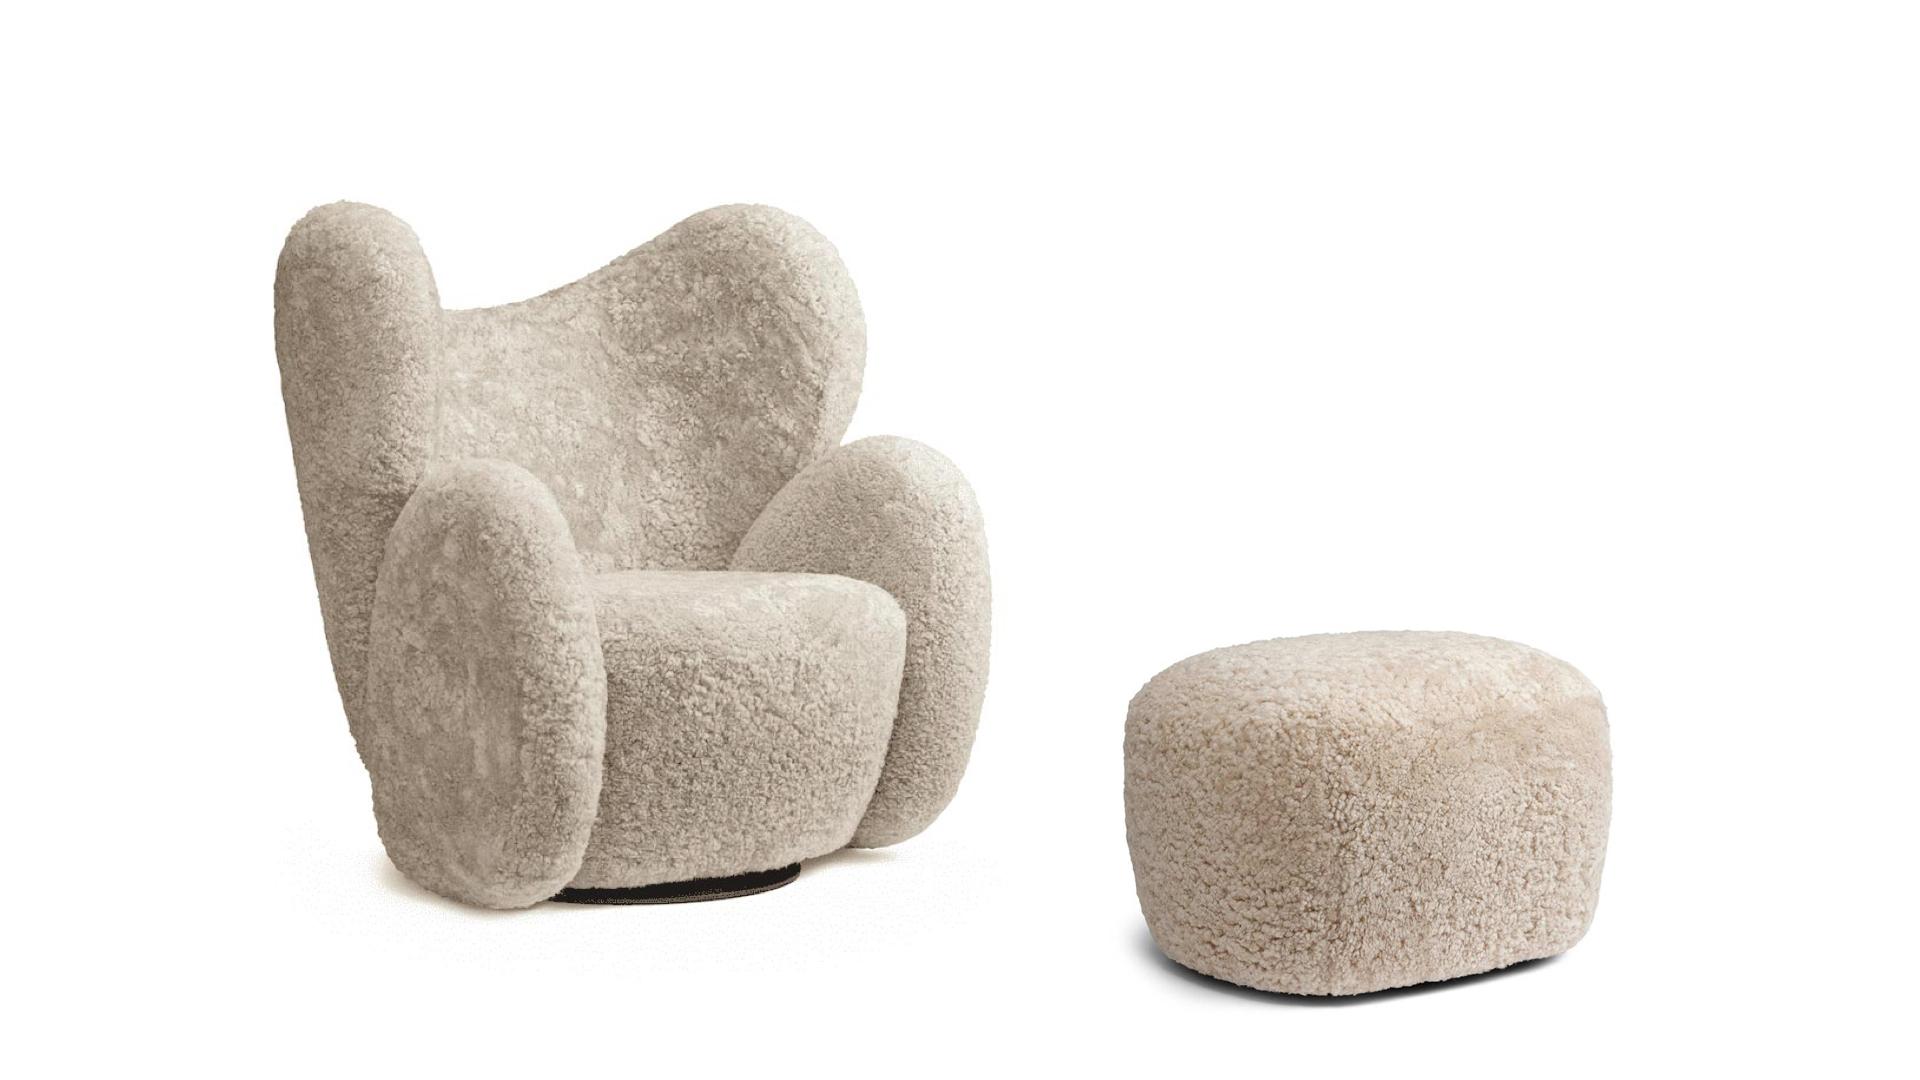 BIG big chair armchair and little big pouf
Signed by Kristian Sofus Hansen and Tommy Hyldahl for Norr11. 

Models shown on the picture:
- Big big chair size: H: 98 cm / SH: 41 cm / W: 96 cm / D: 81 cm
- Little big pouf size: H: 39 cm / W: 60cm